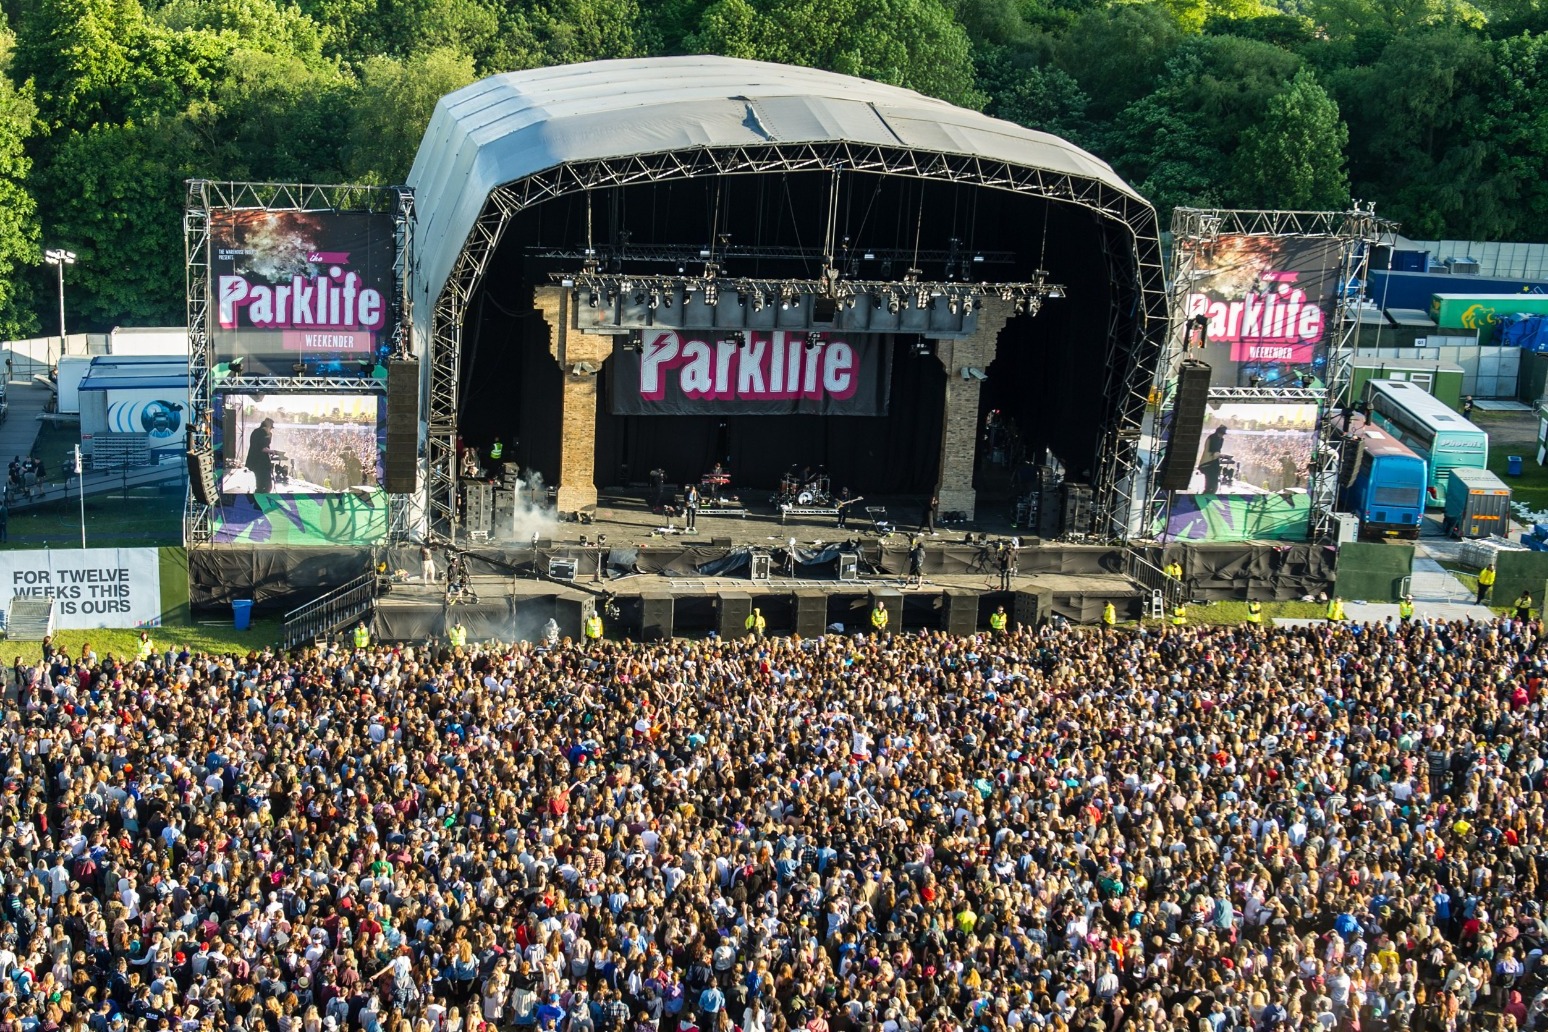 More than 100 UK festivals commit to tackling sexual violence 